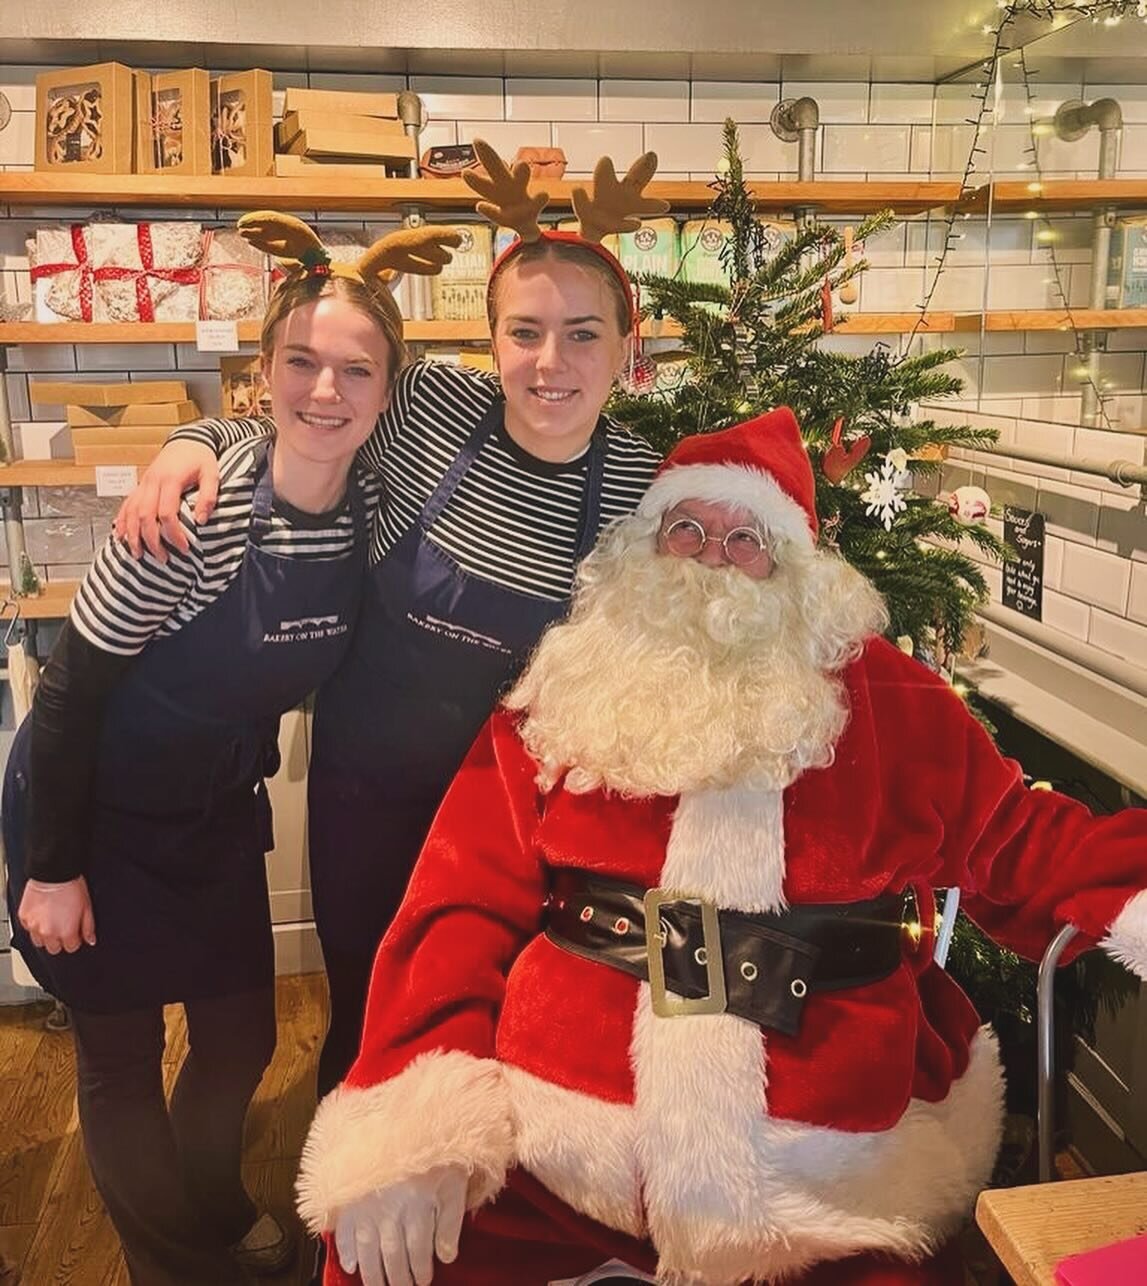 We had a special visitor last Tuesday, the kind of fella who usually visits just once a year 😃
.
.
You can catch him again next Tuesday the 12th and share a biscuit or two 🍪